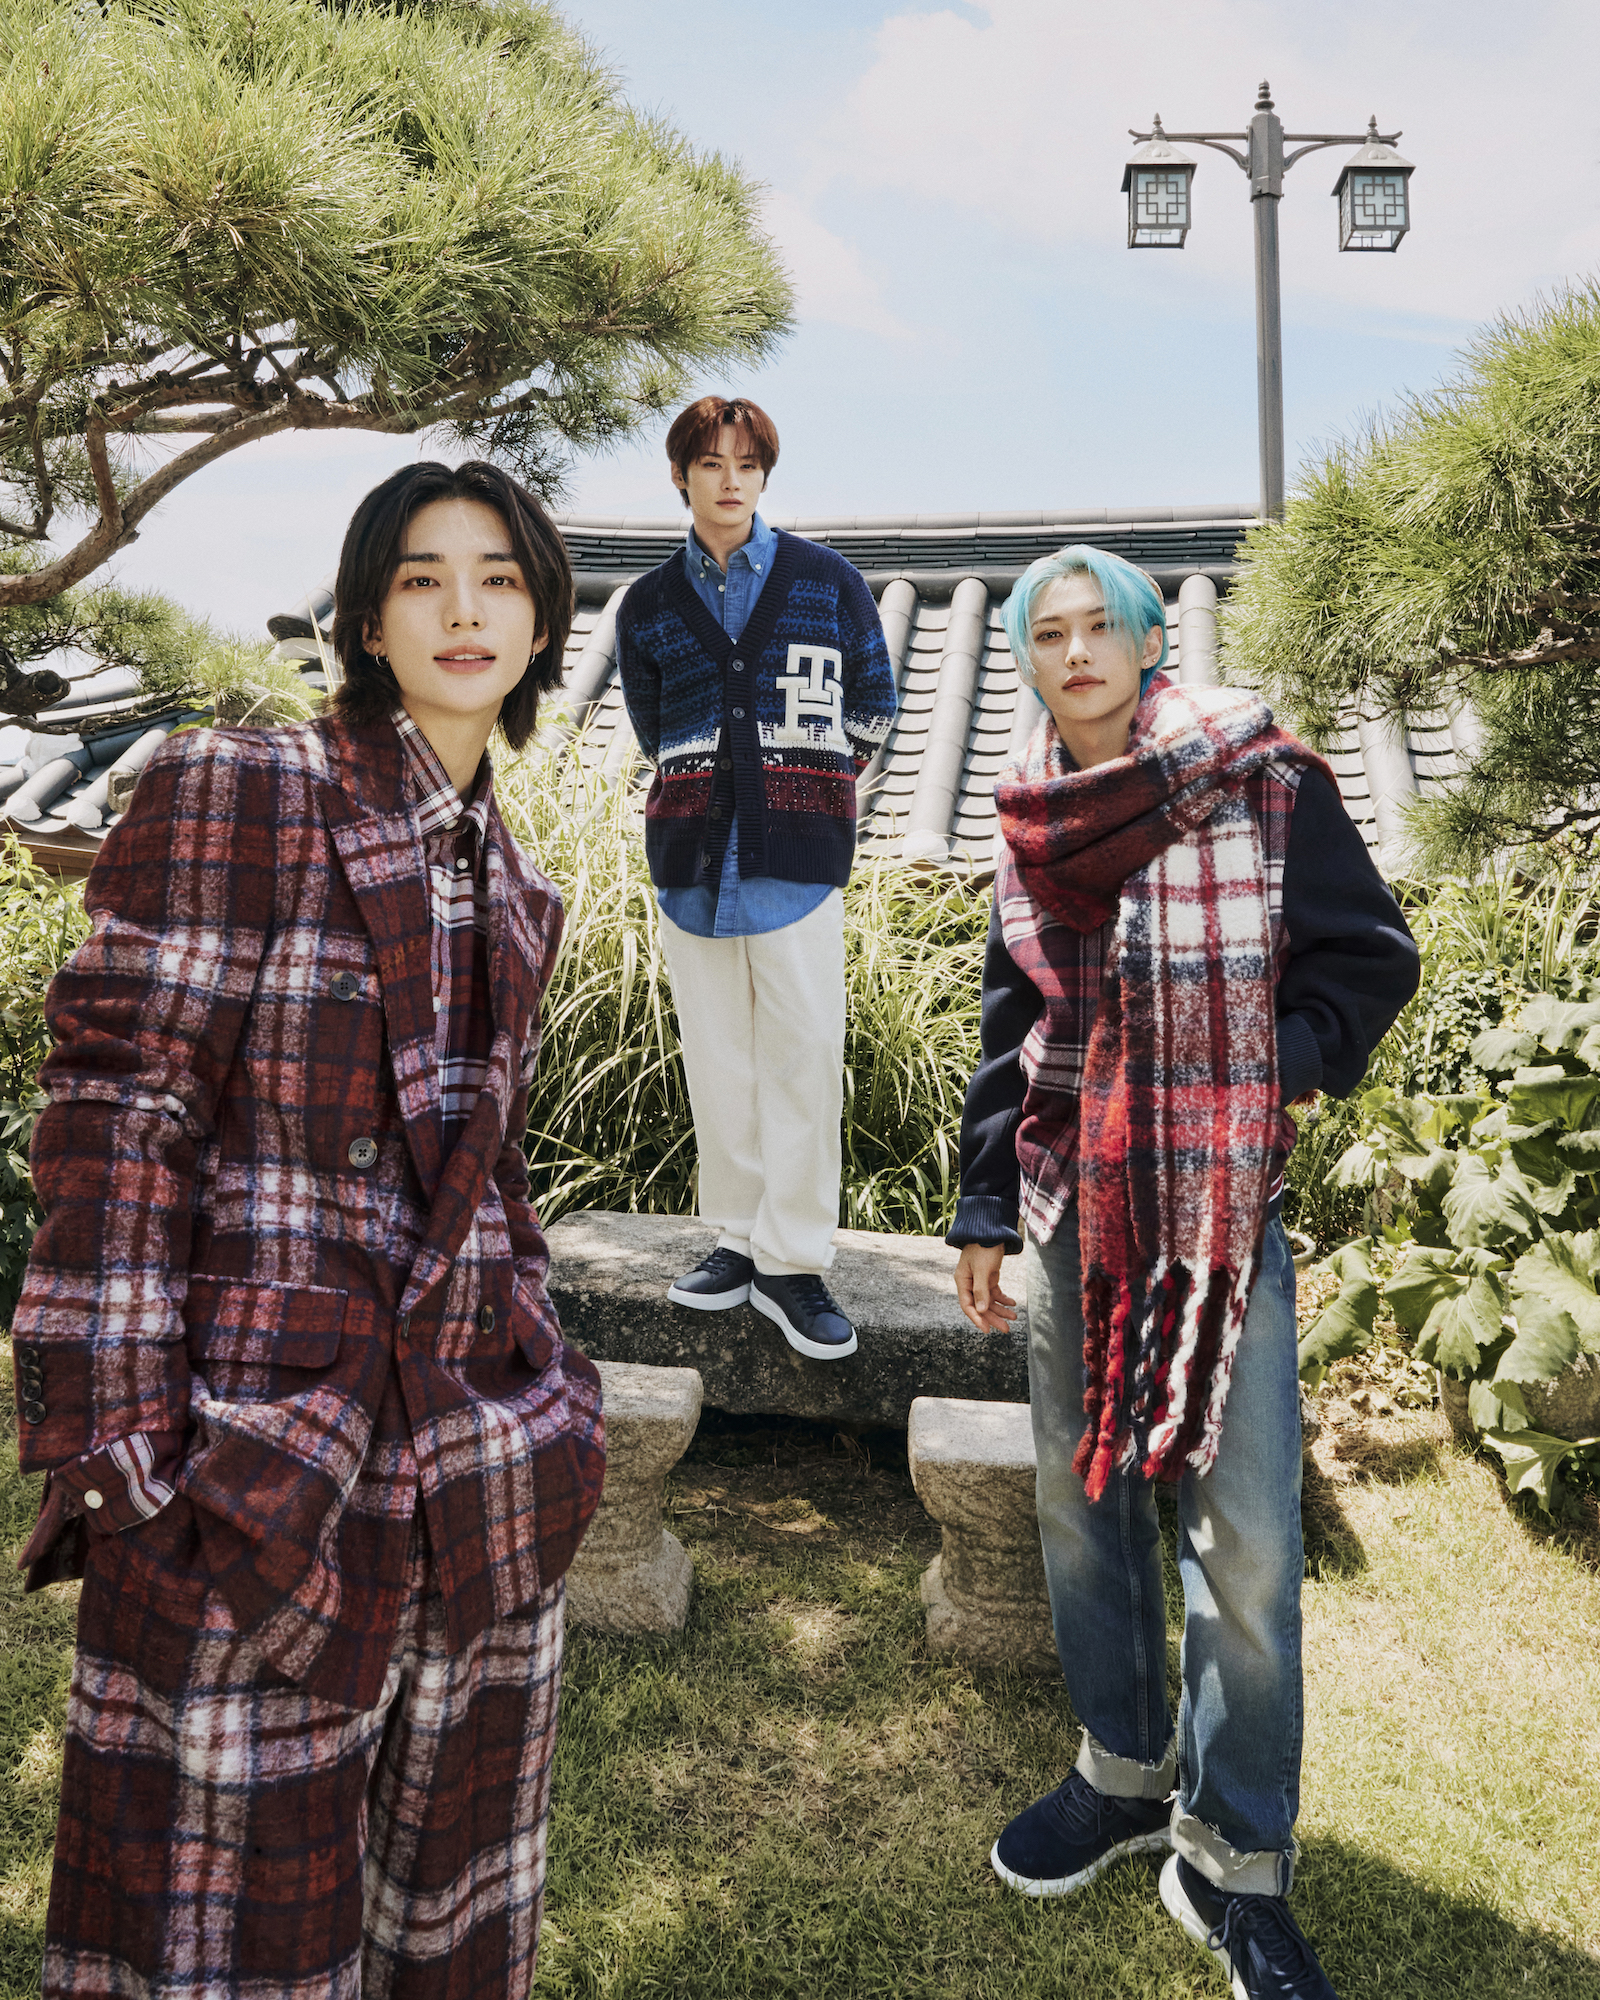 Tommy Hilfiger Brings Together Fashion & Music Royalty for Fall 2023  Campaign